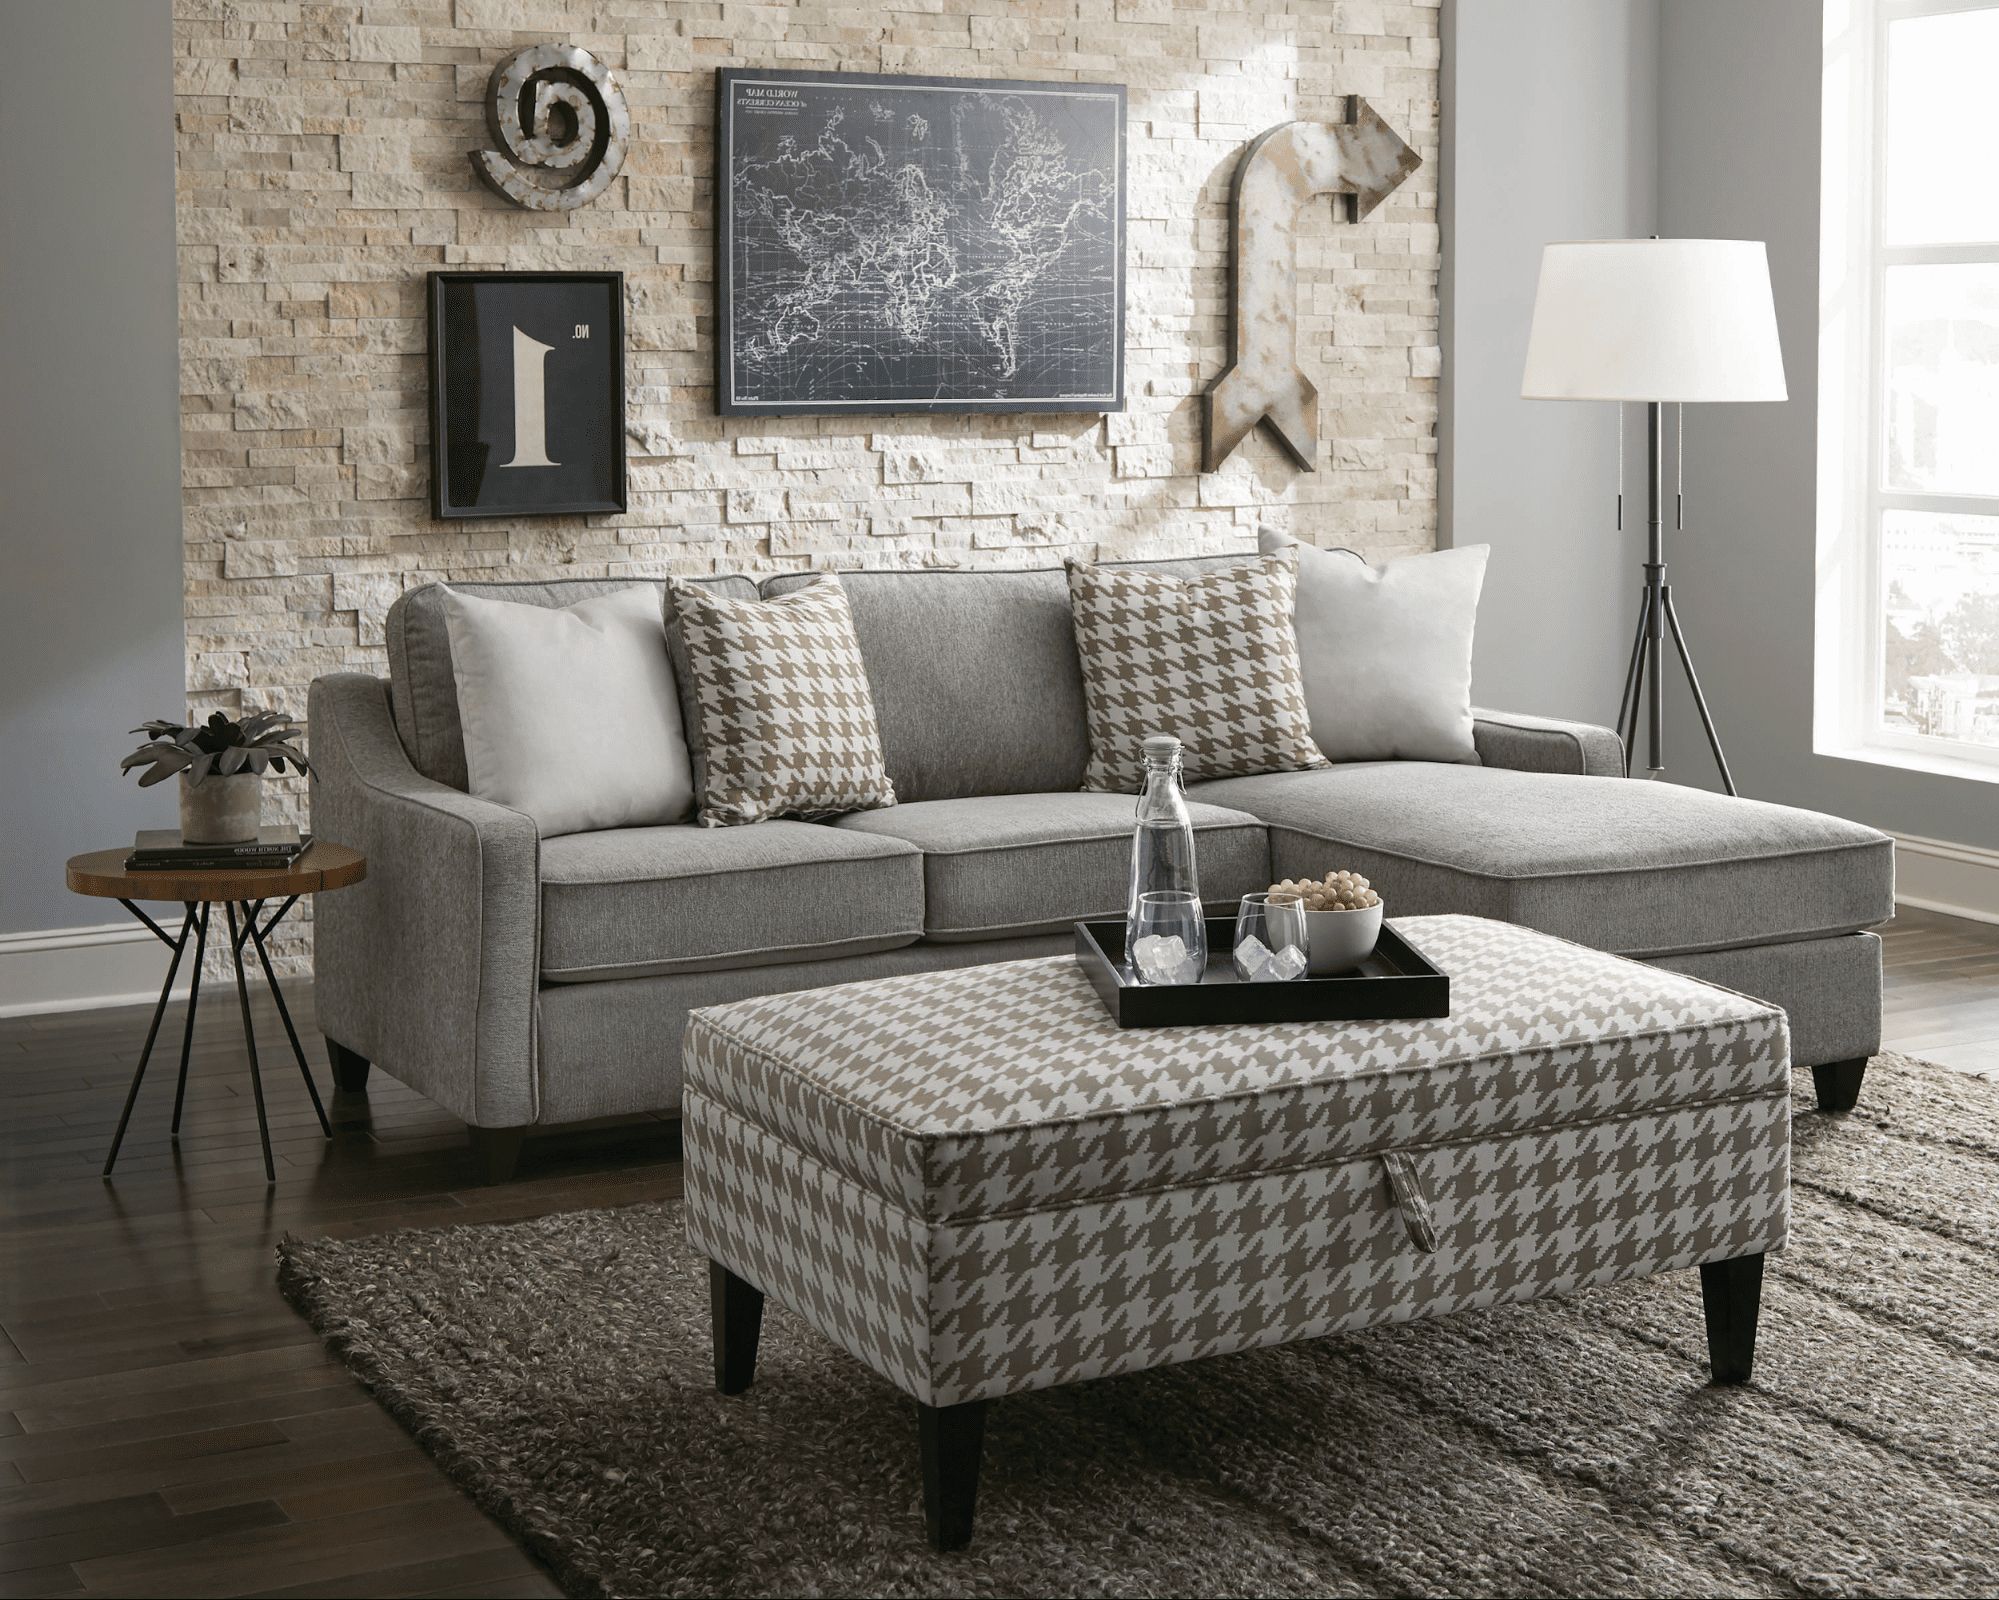 How To Pick A Small Sectional Sofa For A Small Space – Coast Throughout Sectional Sofas With Ottomans And Tufted Back Cushion (Gallery 19 of 20)